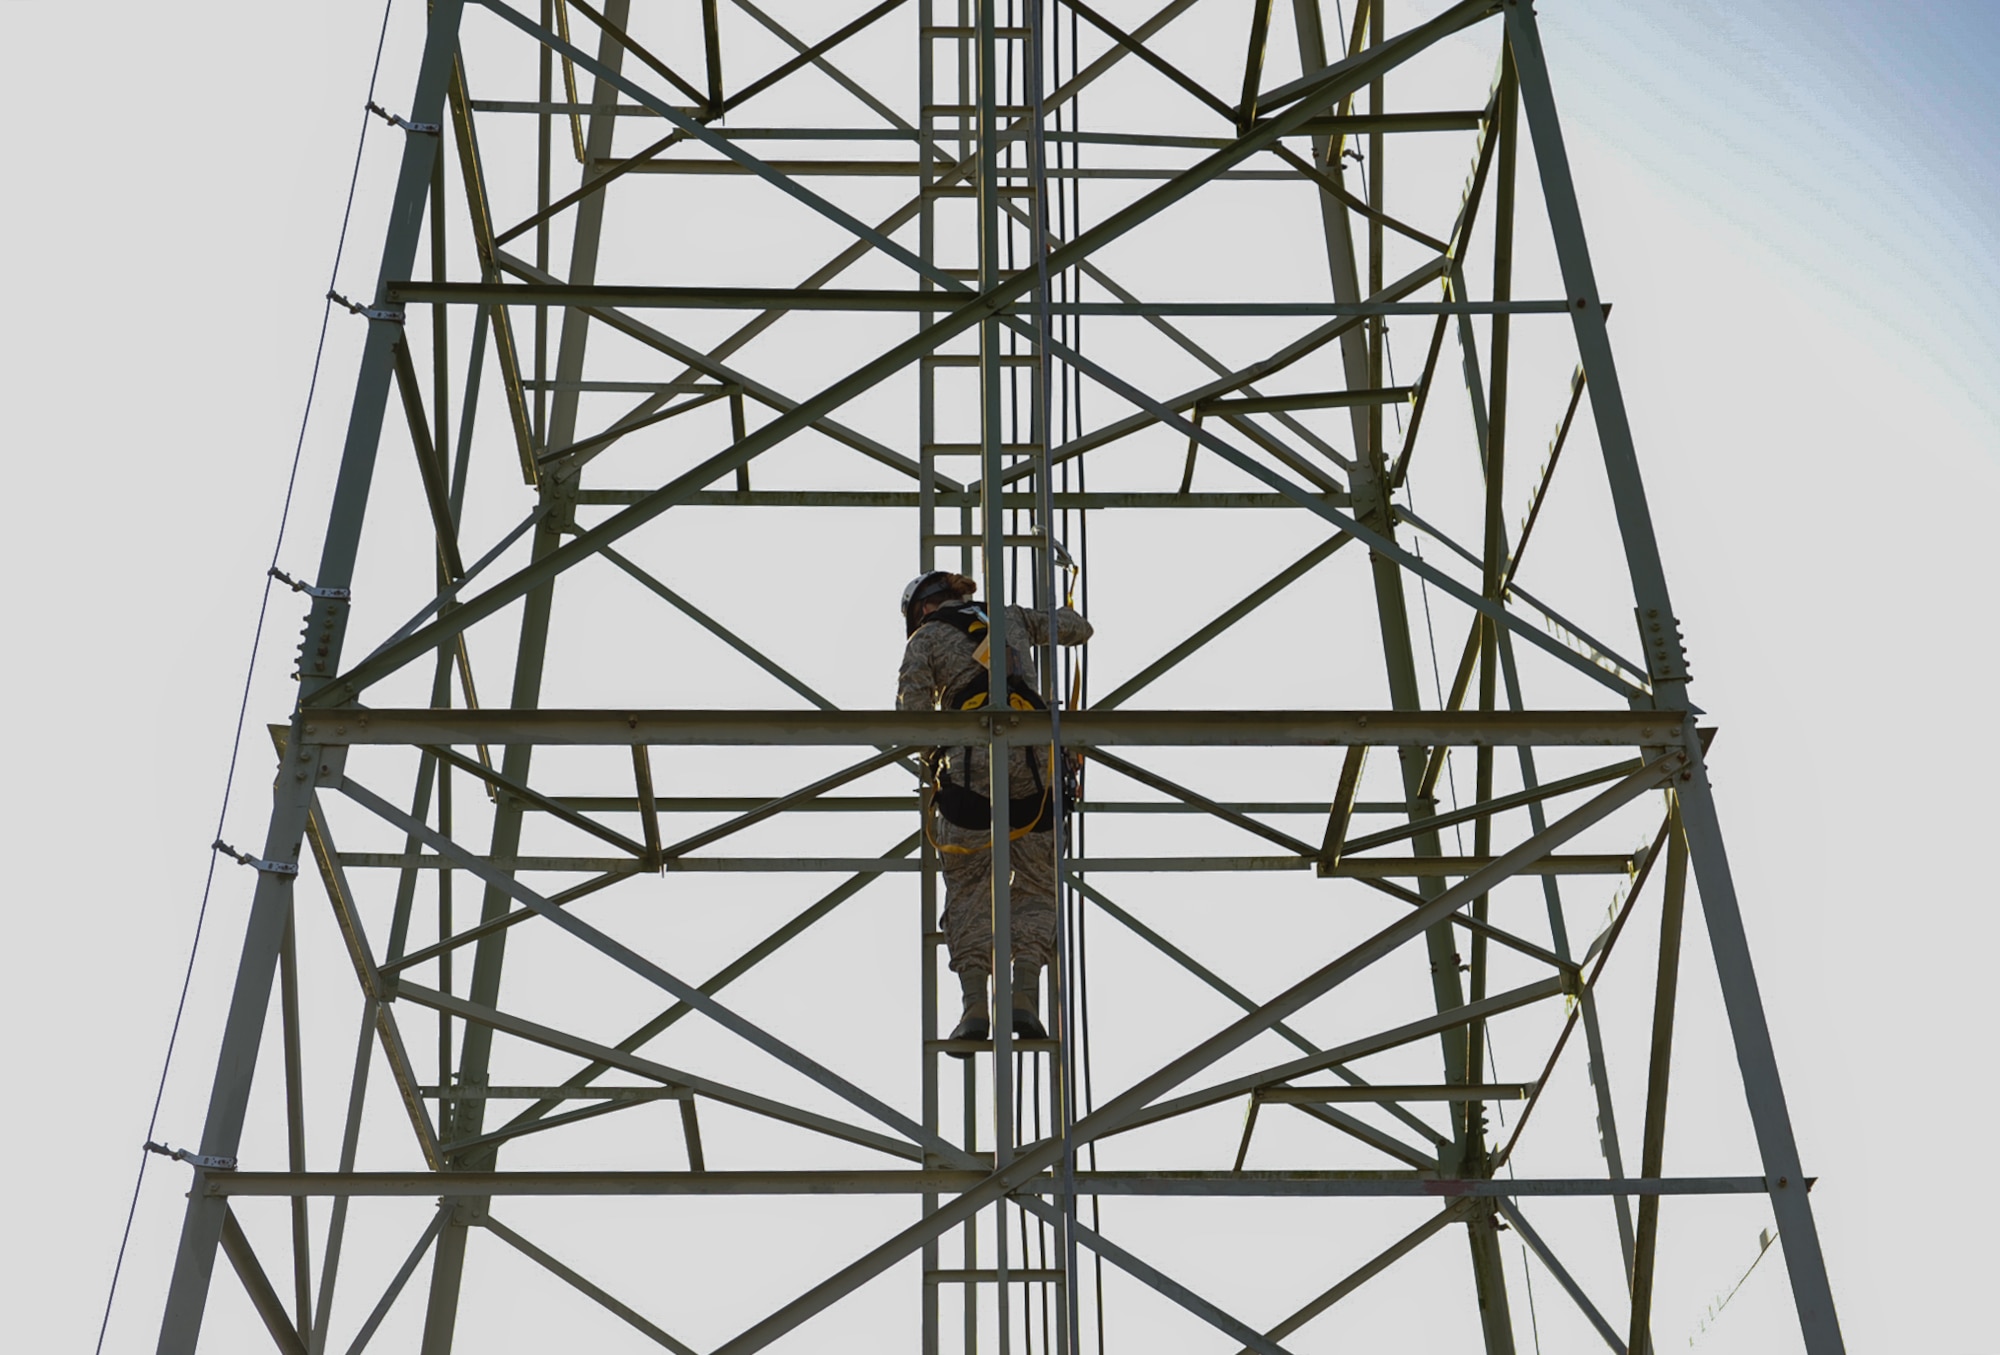 Senior Airman Nikki Erling, 86th Operations Support Squadron airfield systems technician, climbs air traffic control radio antennas at Ramstein Air Base, Germany, Nov. 14, 2016. The 86th Operations Support Squadron Air Traffic Control and Landing Systems flight maintains approximately 40dozens of air traffic control radio antennas across the base, furthering the mission to generate and employ airpower around the globe. (U.S. Air Force photo by Airman 1st Class Savannah L. Waters)